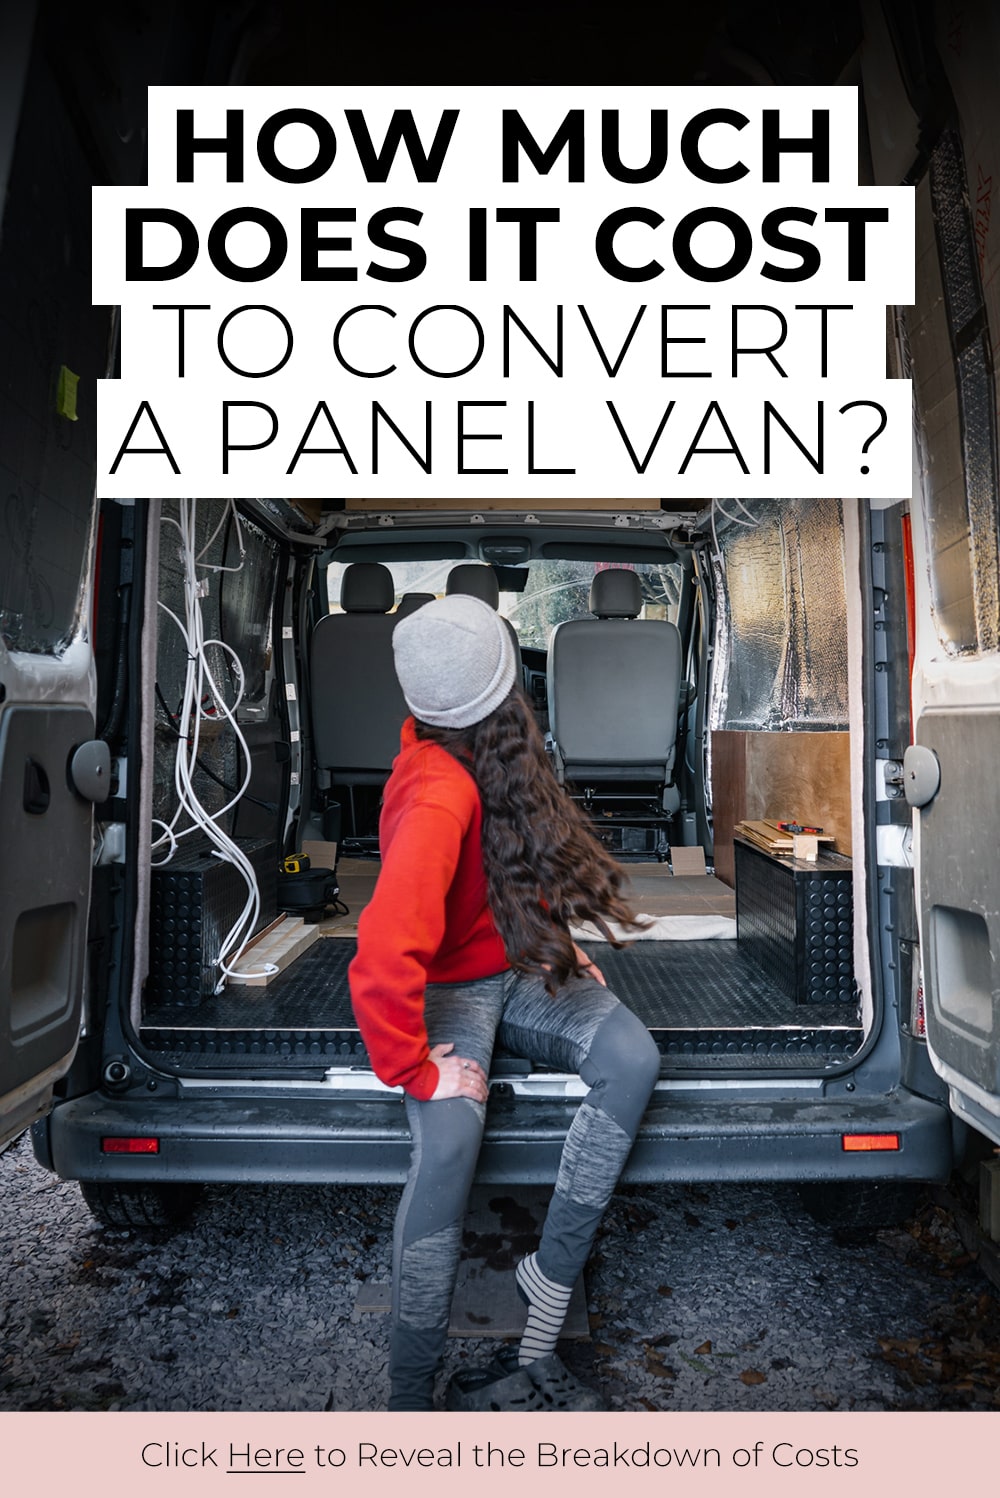 How much does a van conversion cost uk?